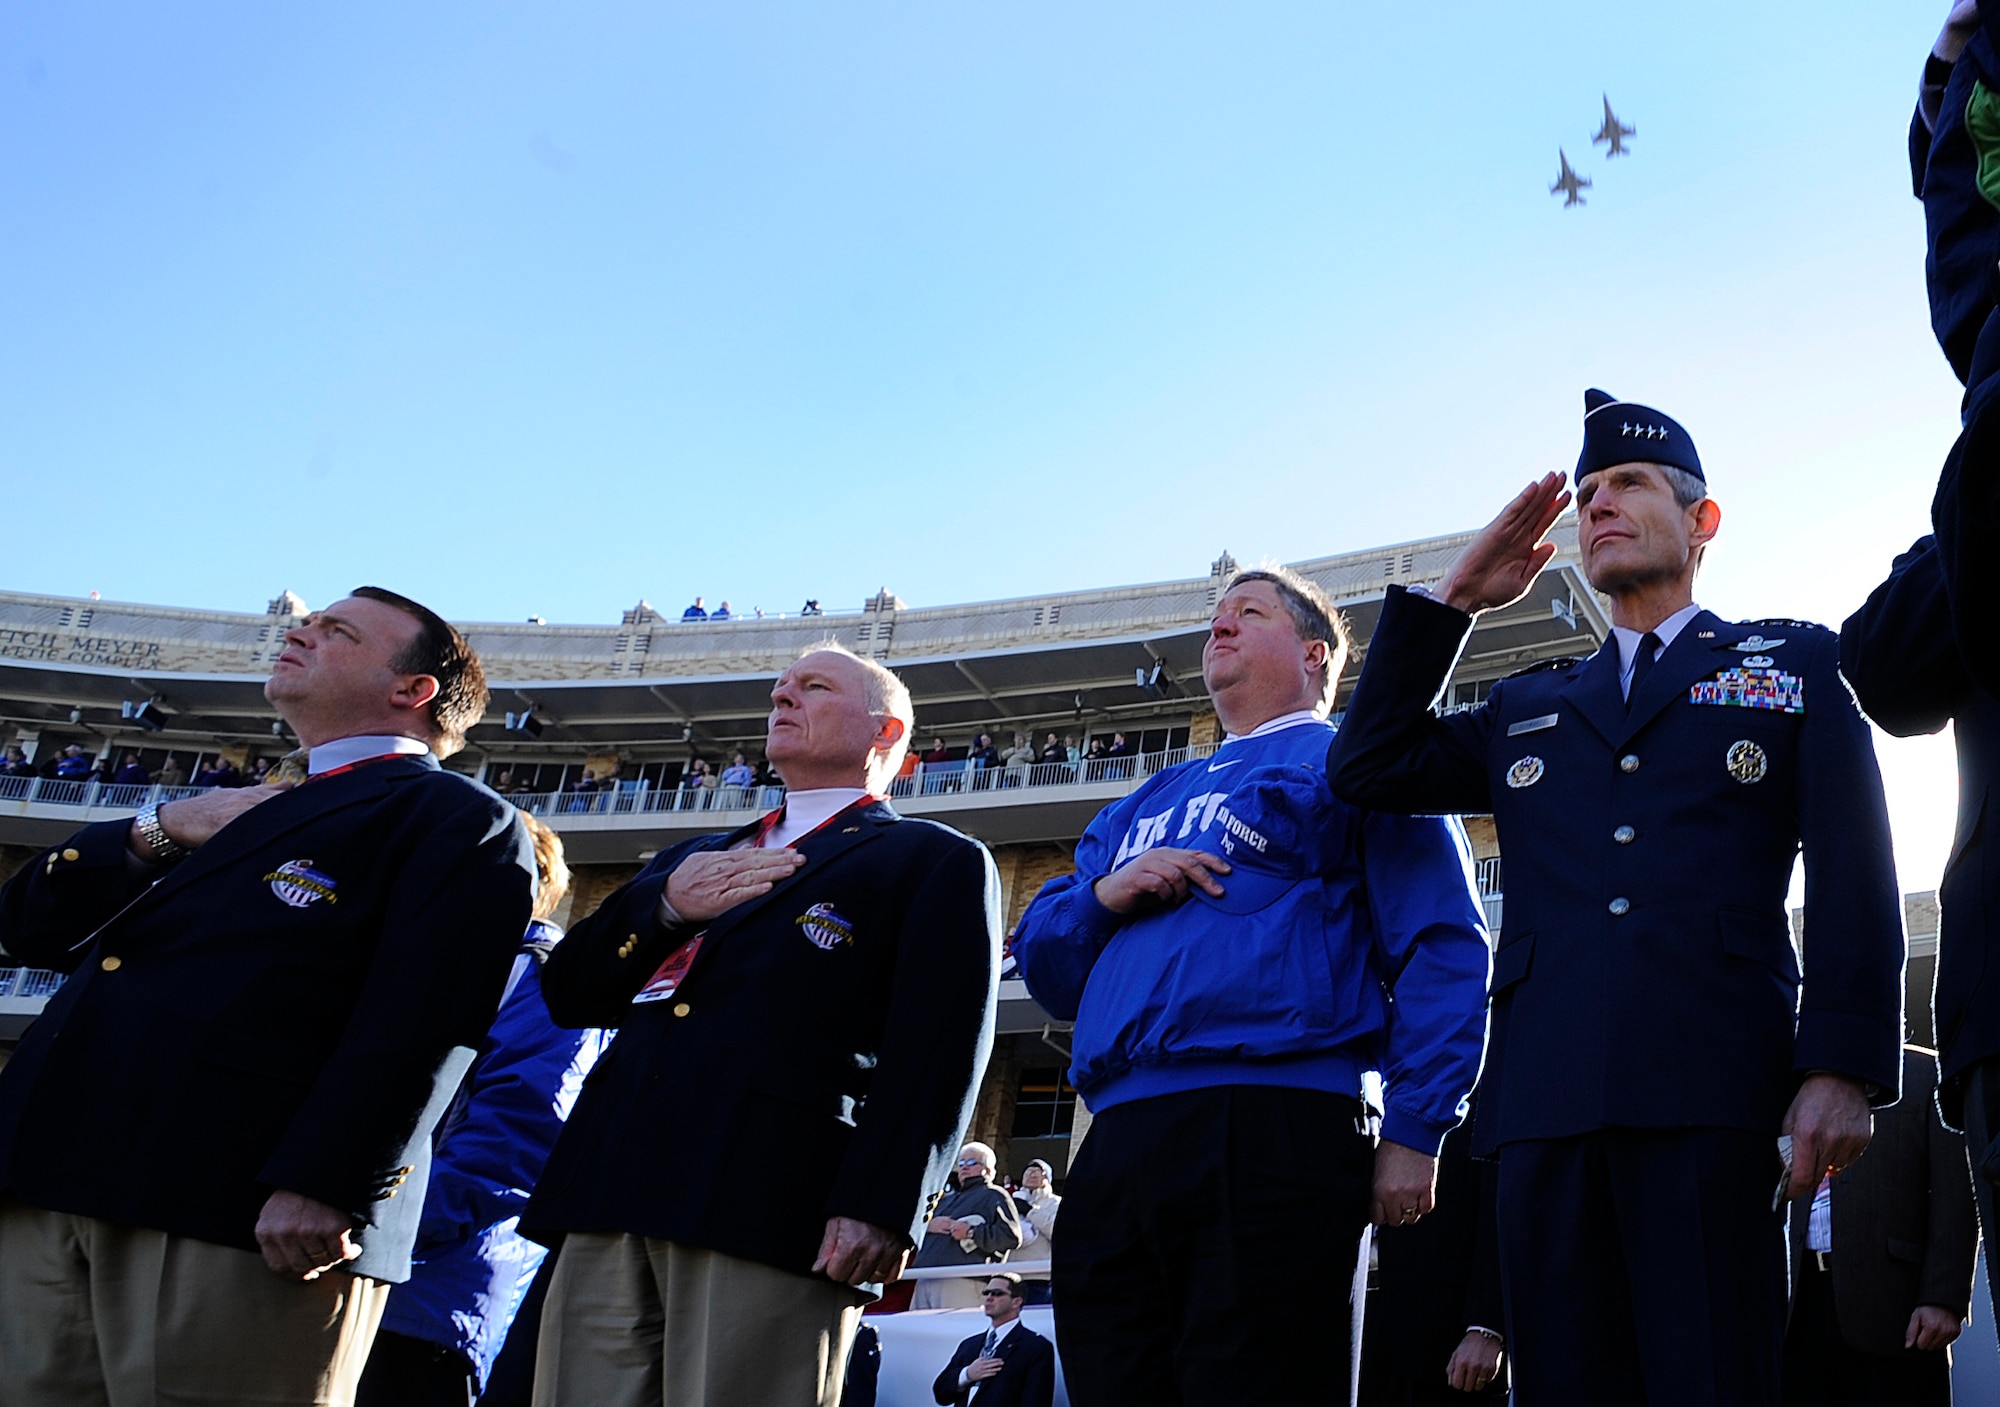 Secretary of the Air Force Micheal B. Donley (center) and Air Force Chief of Staff Gen. Norton A. Schwartz (right) salute during the national anthem while F-16 Fighting Falcons from the 301st Fighter Wing perform a fly-over before the Bell Helicopter Armed Forces Bowl game between the U.S. Air Force Academy and the University of Houston on Dec. 31 at Fort Worth, Texas. (U.S. Air Force photo/Staff Sgt. Bennie J. Davis III)